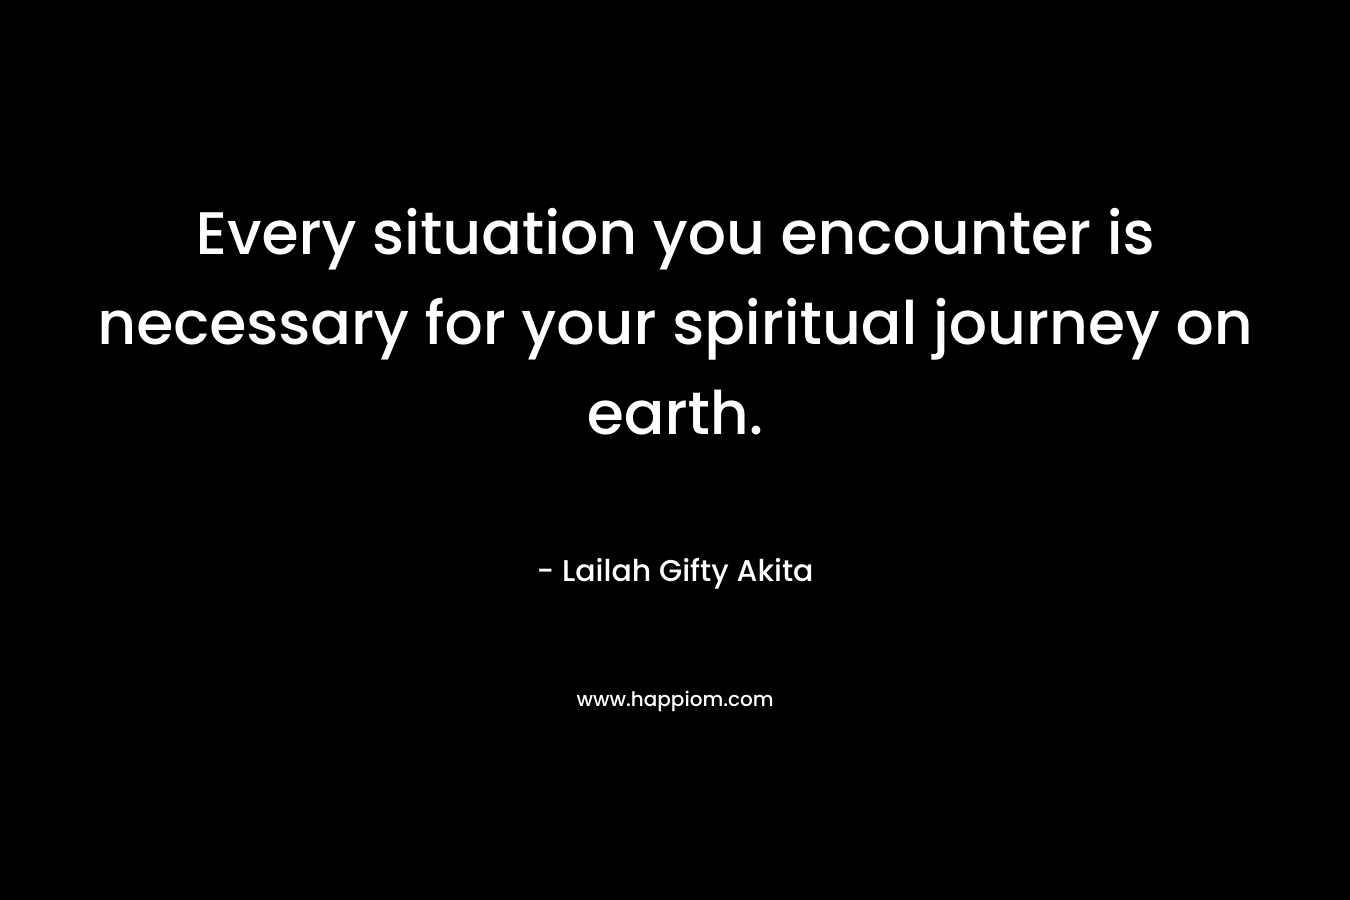 Every situation you encounter is necessary for your spiritual journey on earth.